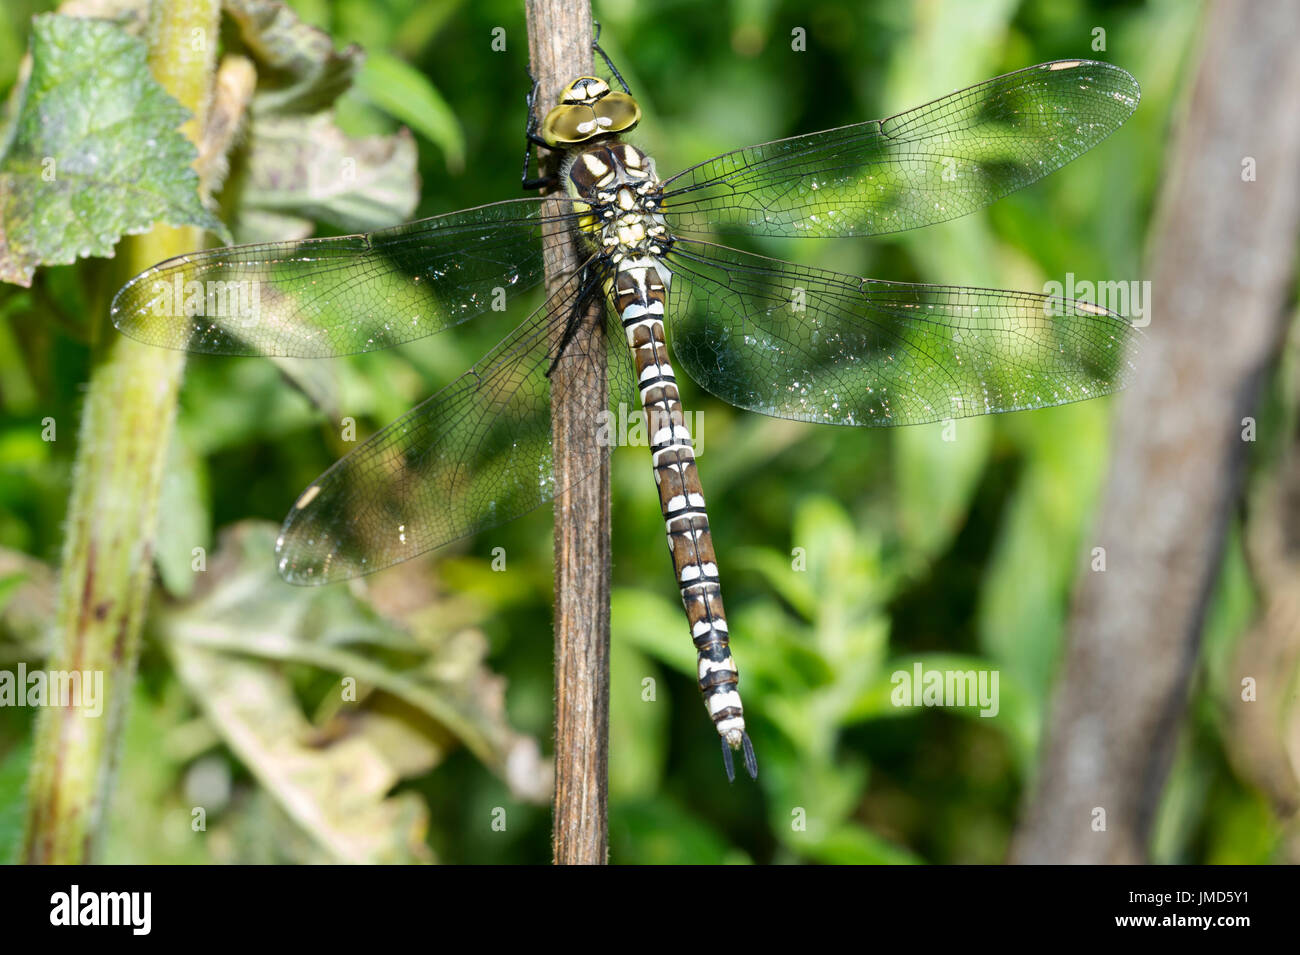 A Southern Hawker (Aeshna cyanea) Dragonfly drying out after a summer storm in the East Yorkshire Countryside Stock Photo